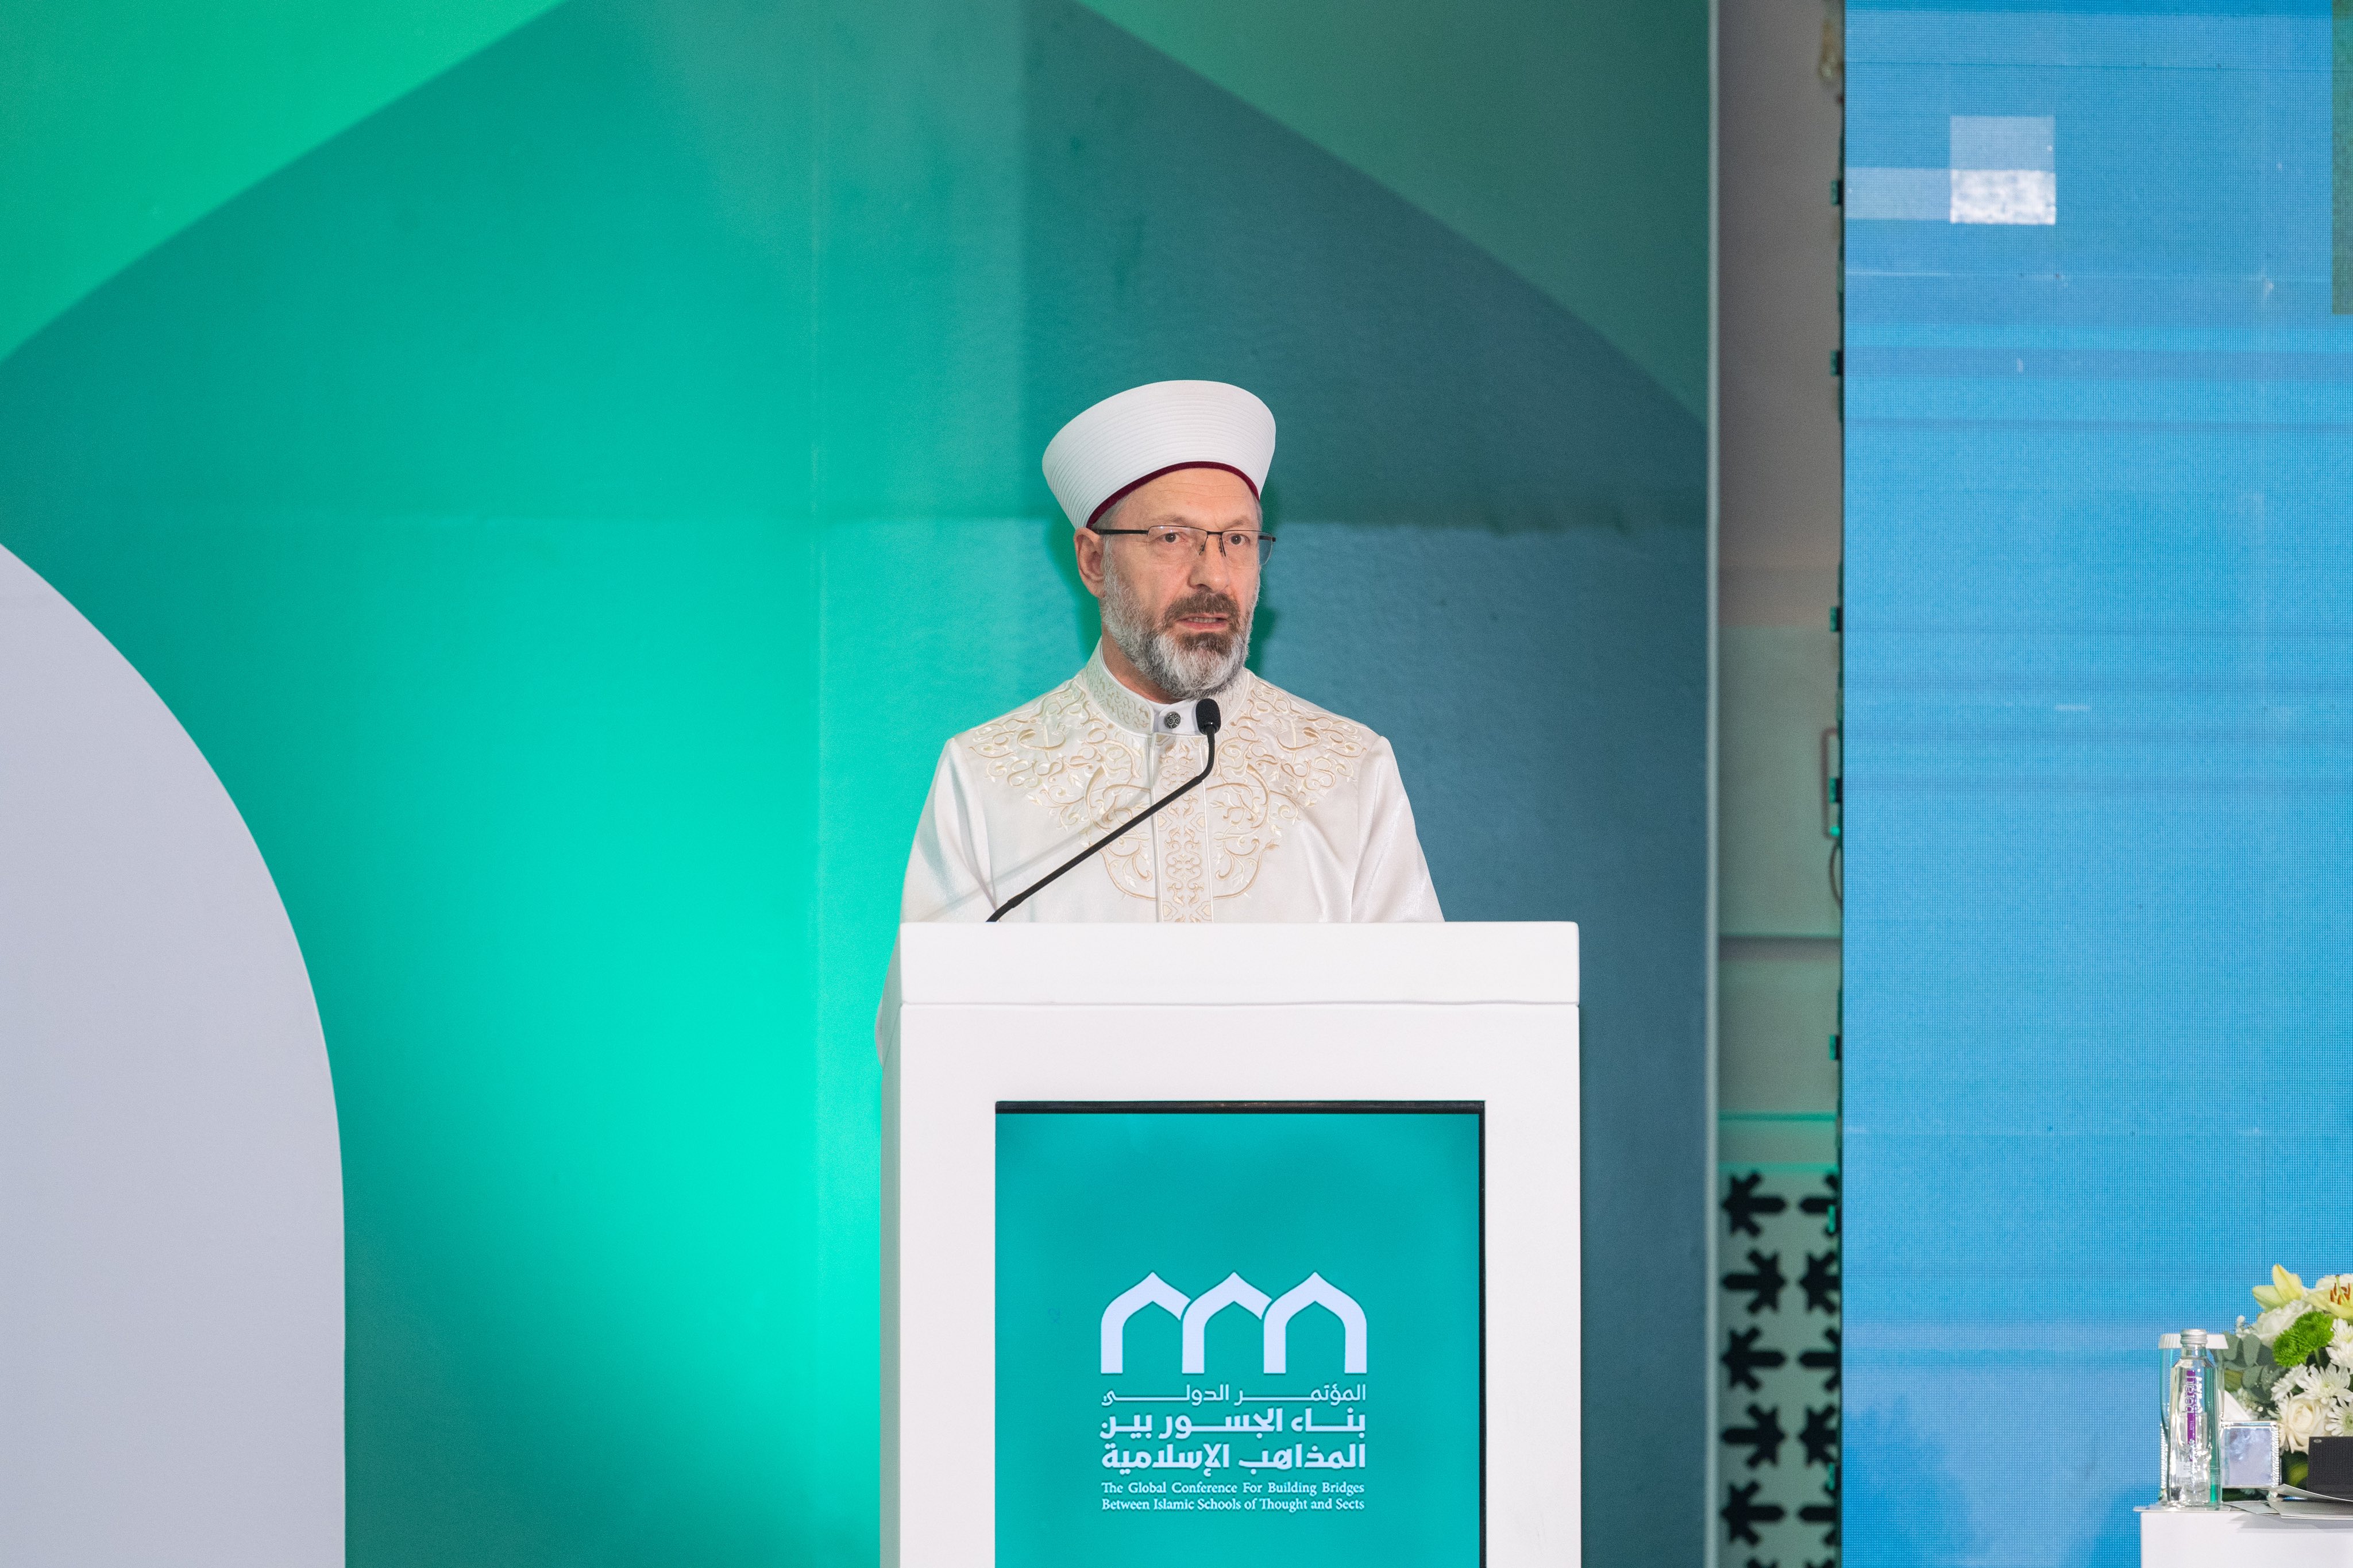 His Excellency Prof. Ali Erbaş, President of Religious Affairs in the Republic of Turkey, at the opening ceremony of the Global Conference for Building Bridges between Islamic Schools of Thought and Sects: